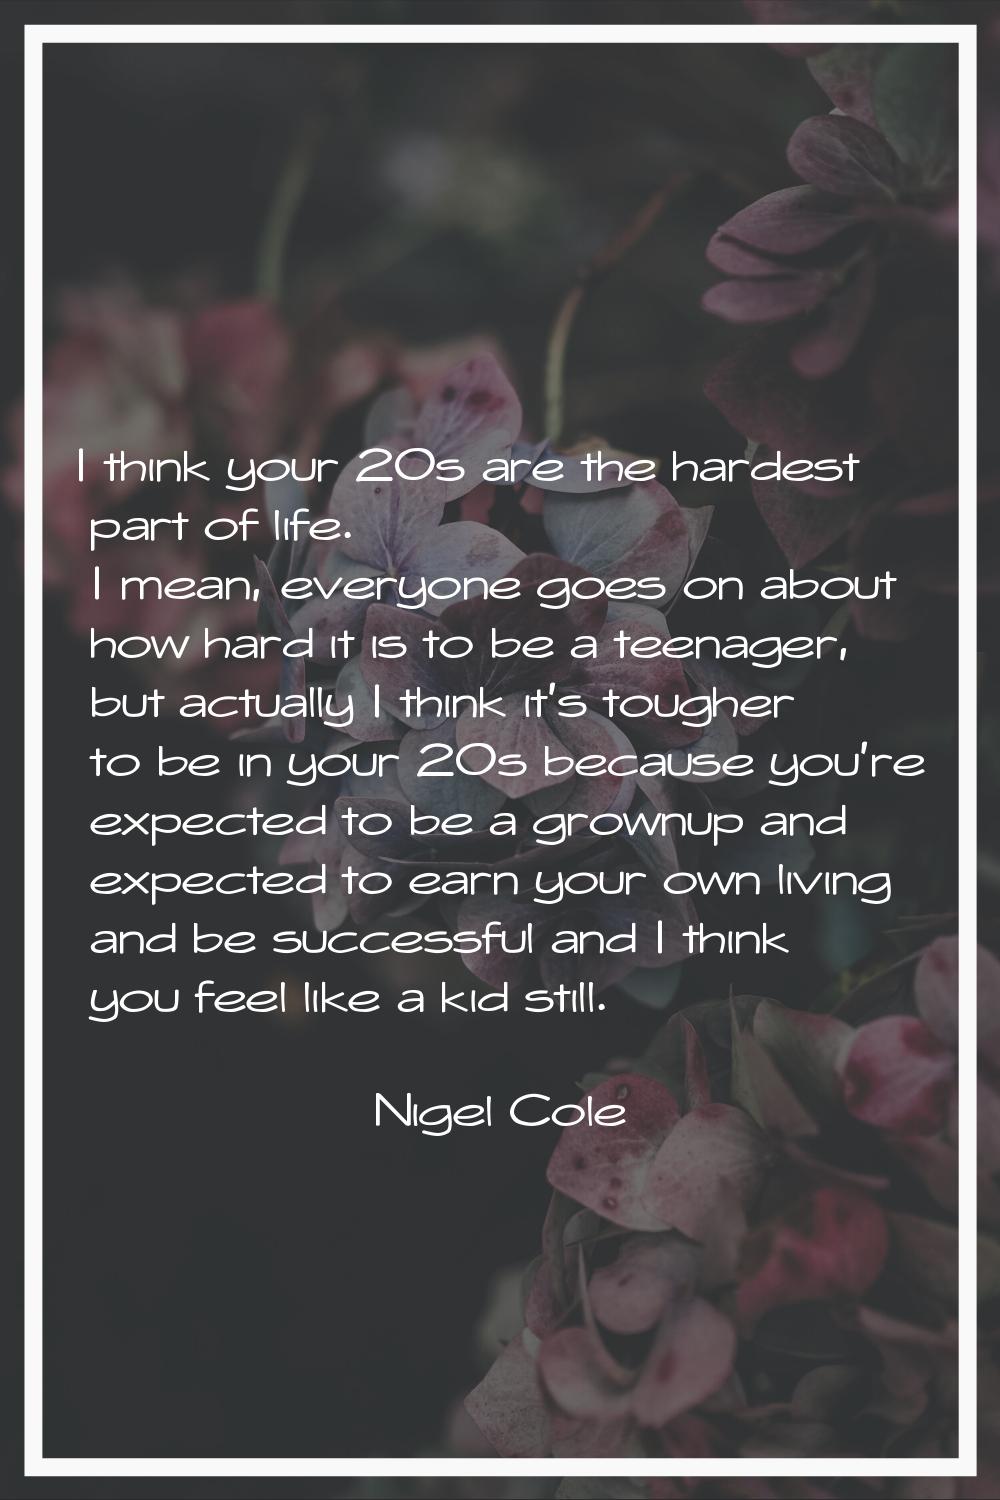 I think your 20s are the hardest part of life. I mean, everyone goes on about how hard it is to be 